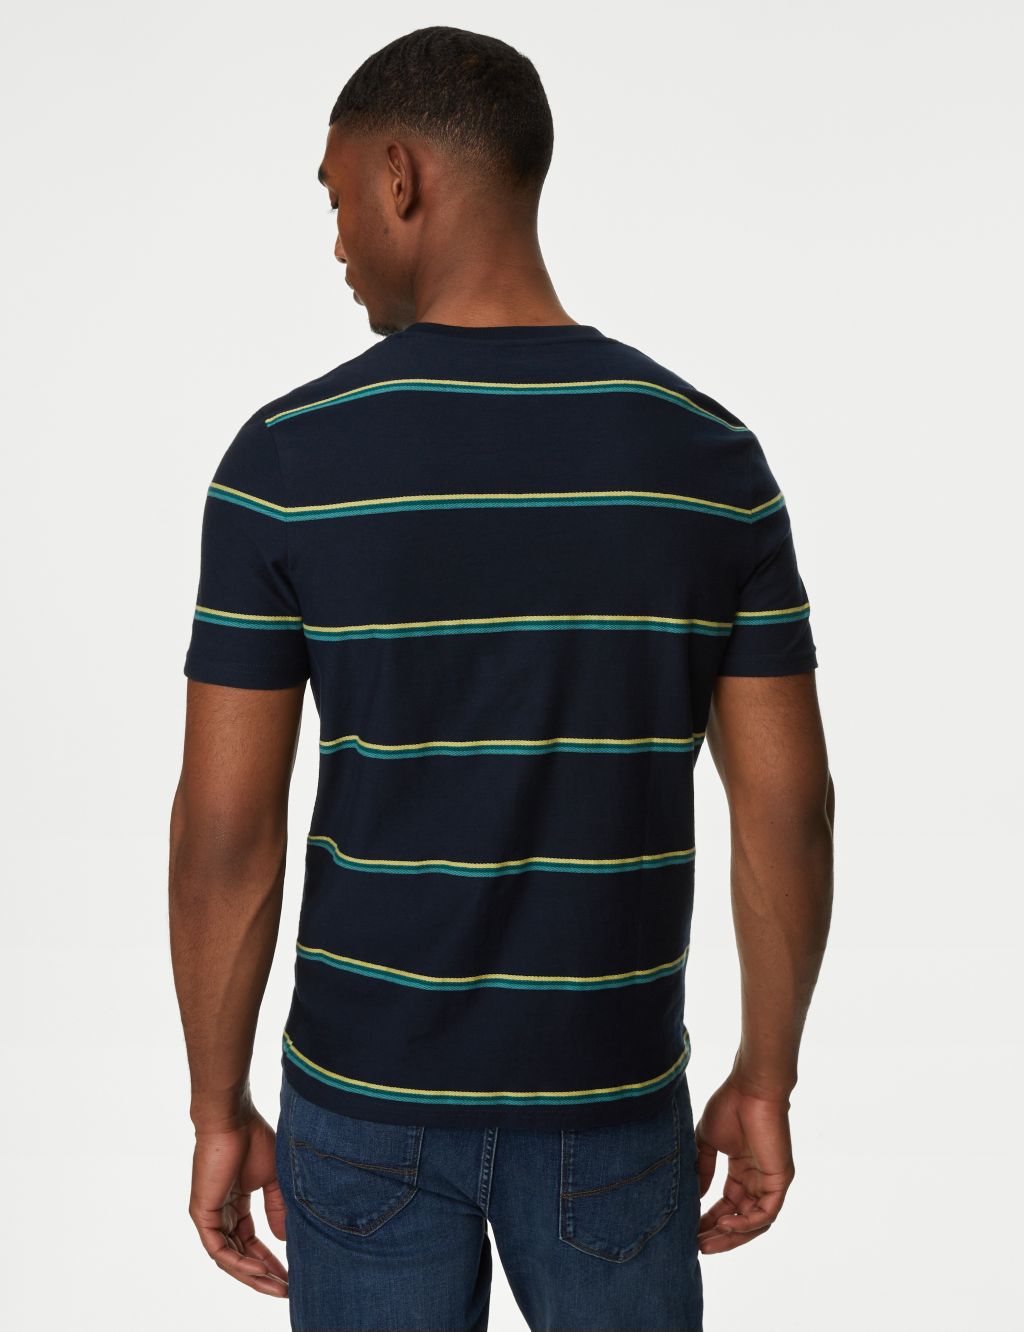 Pure Cotton Textured Striped T-Shirt image 5